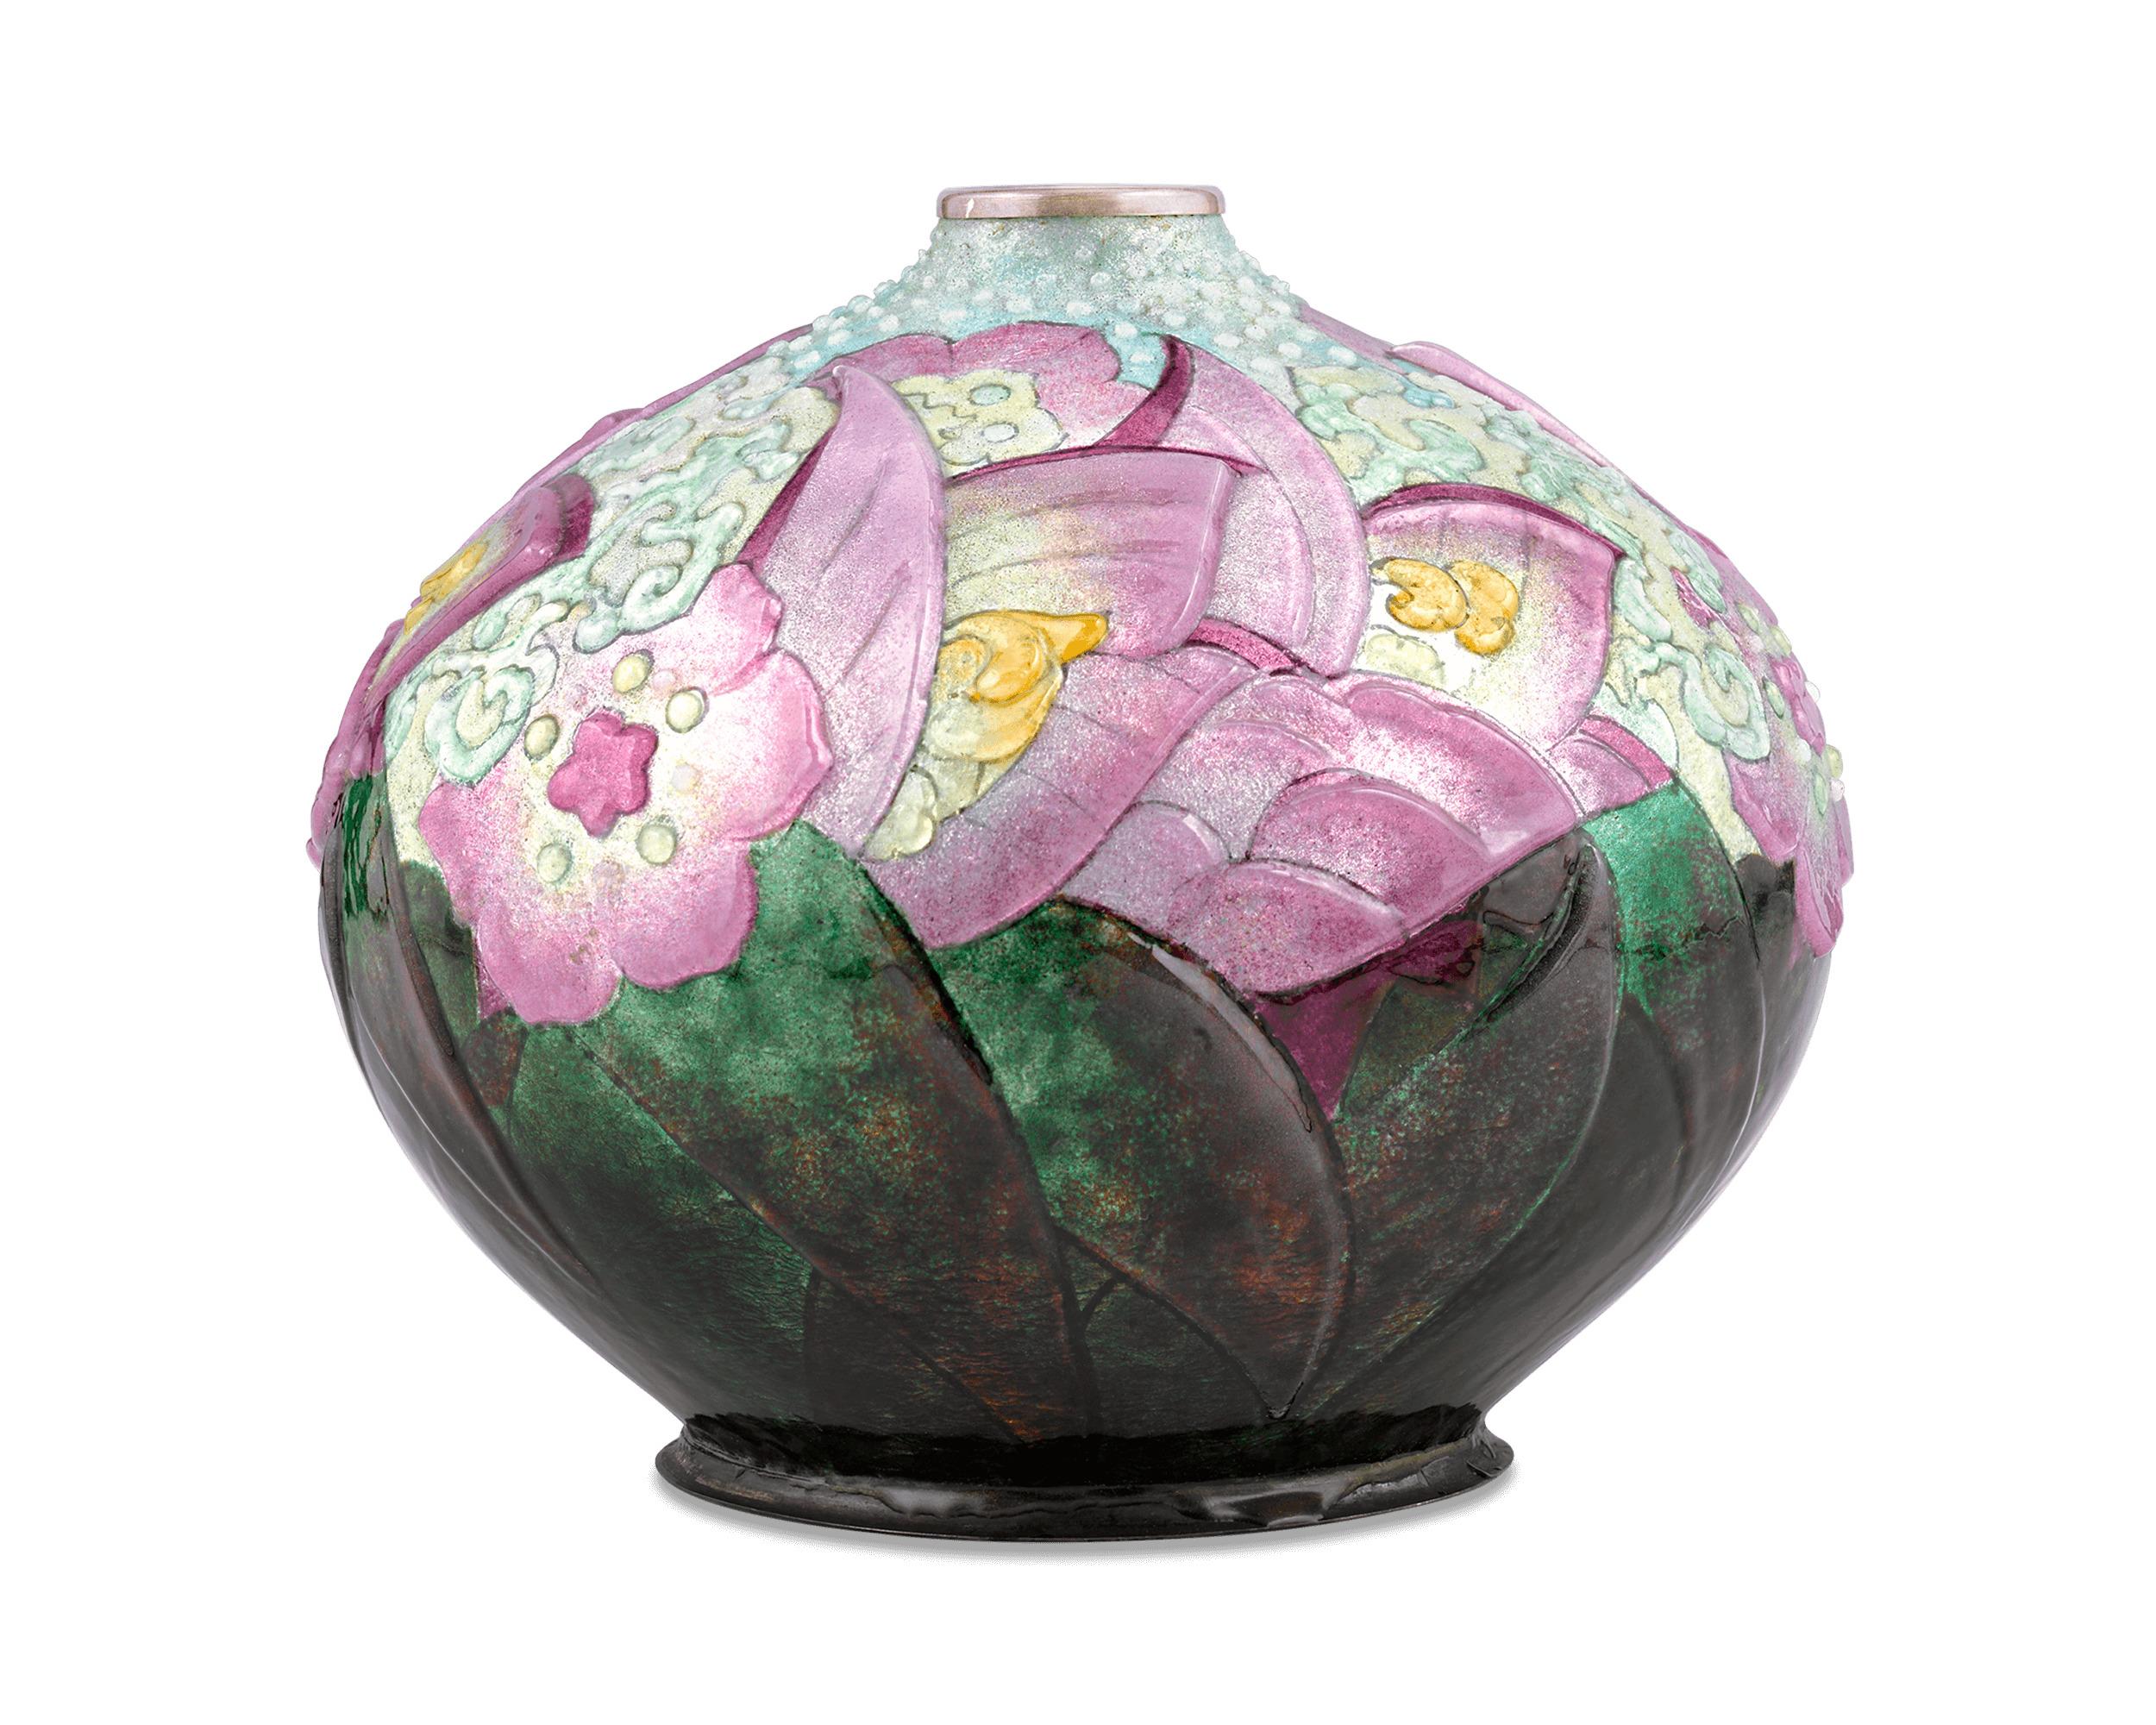 This rare and delicate enameled vase is a testament to the exceptional artistry of Camille Fauré. The rounded form of this piece is made from copper that has been hand-enameled with luminous, incandescent greens, yellows and purples to delightful